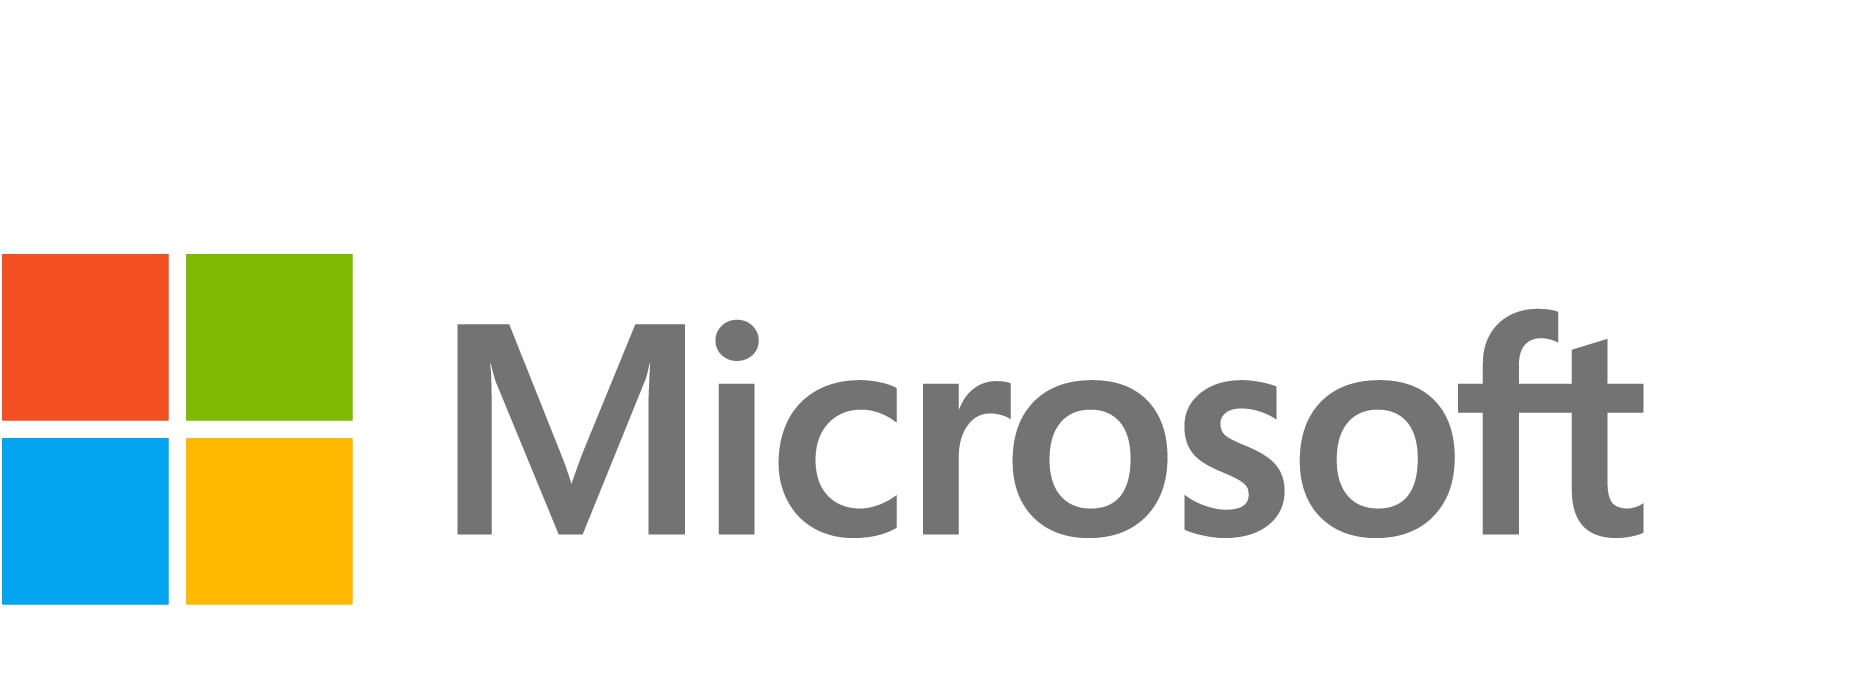 Microsoft Windows Server 2022 - External Connector License - unlimited external users